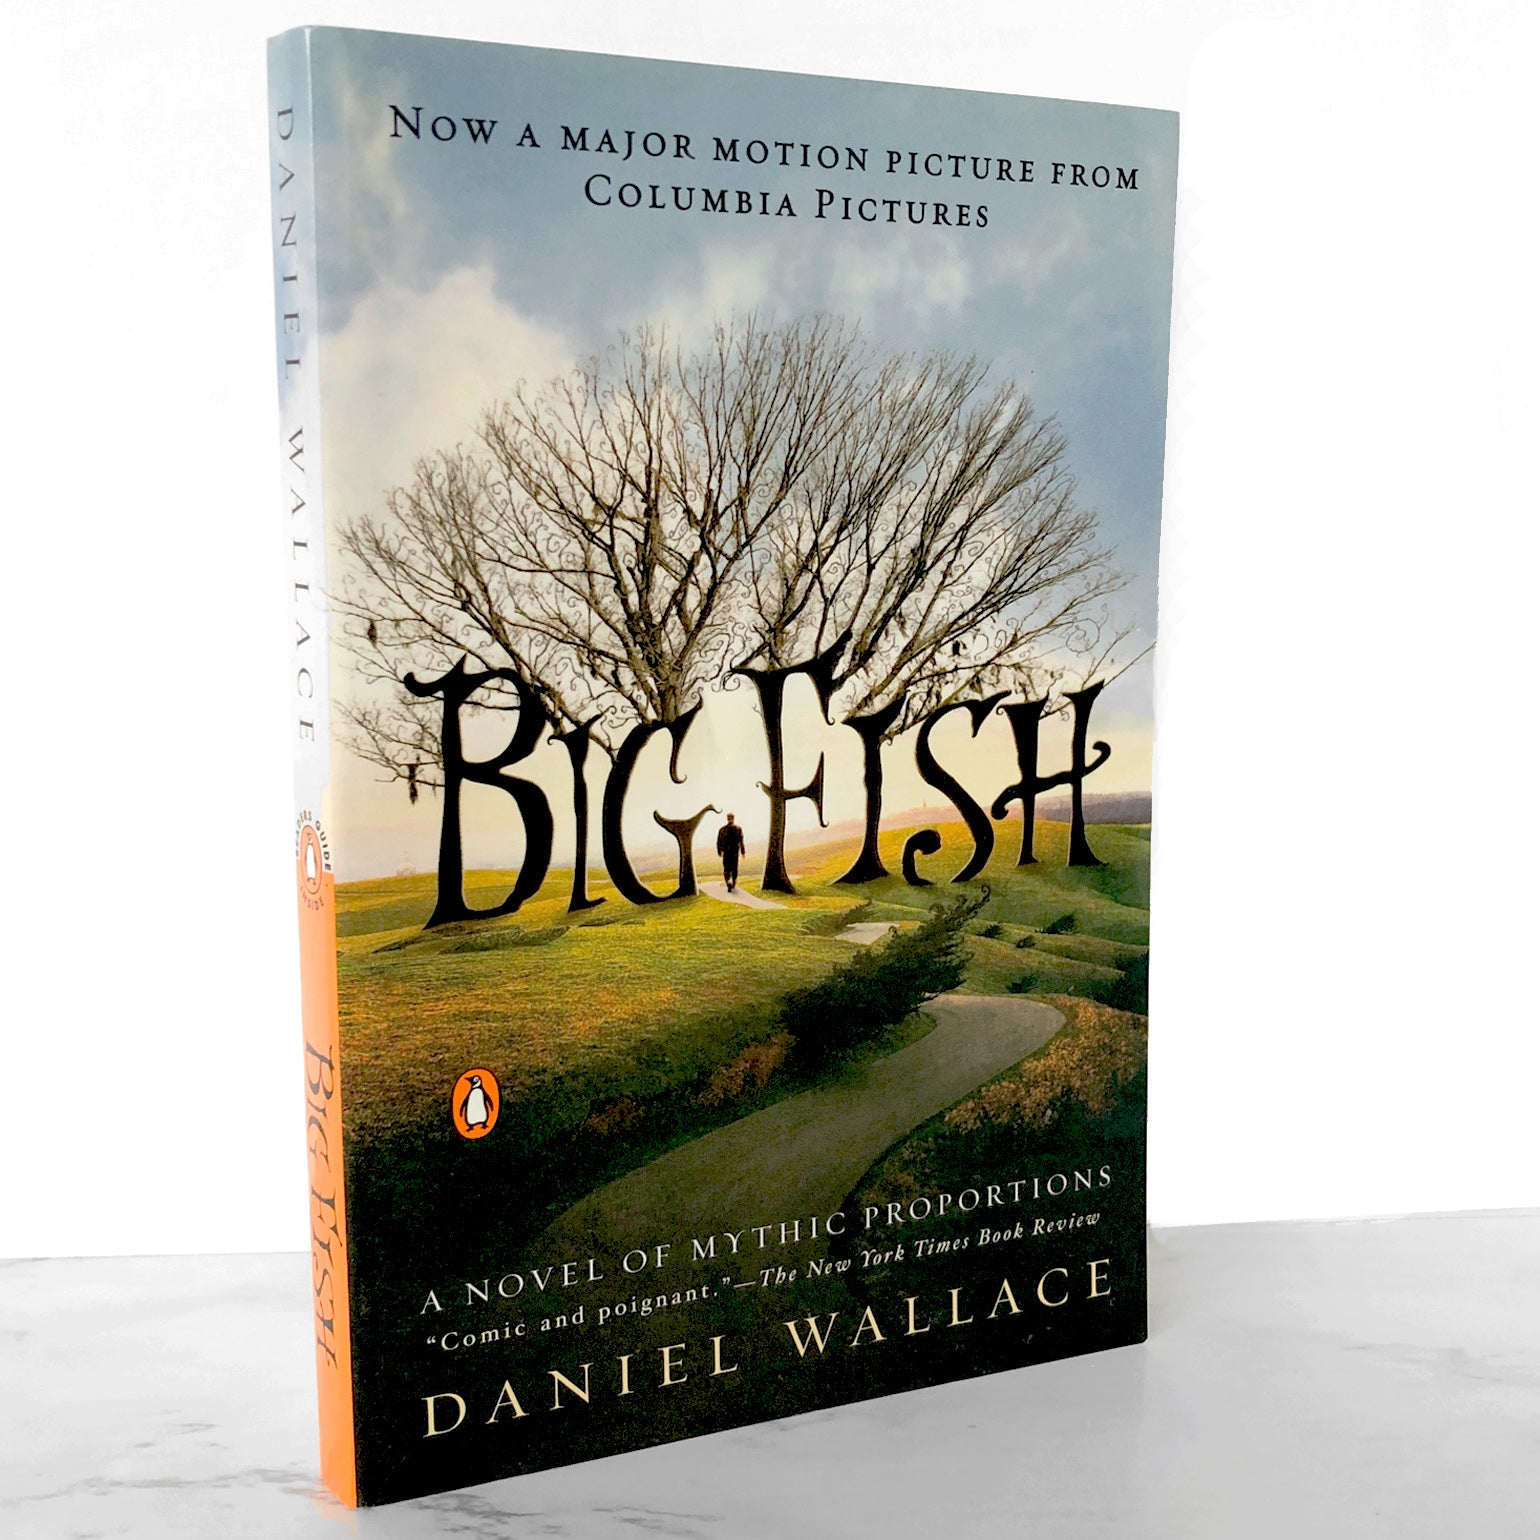 Big Fish: A Novel of Mythic Proportions by Daniel Wallace [TRADE PAPER